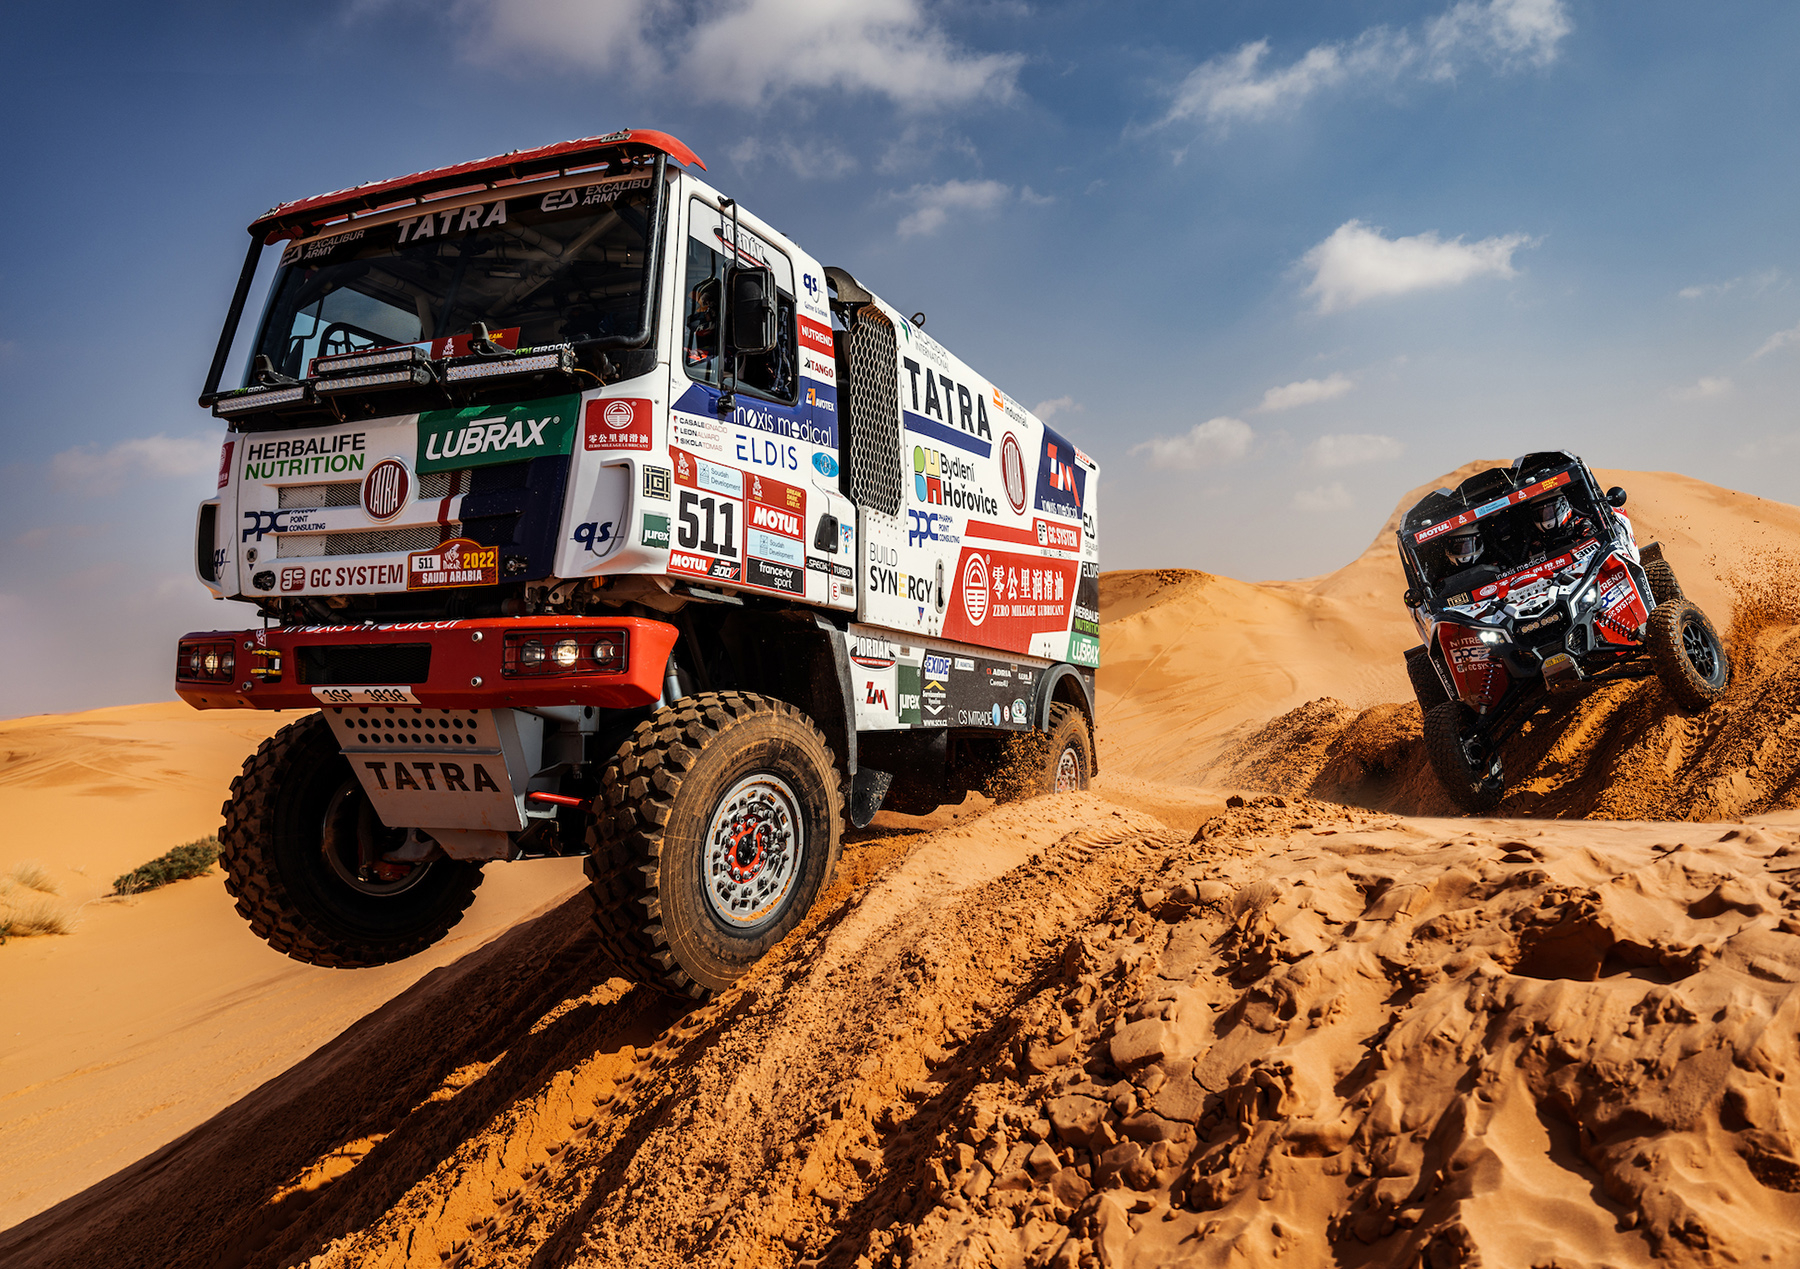 Next year's Dakar Rally promises more deserts and more challenging